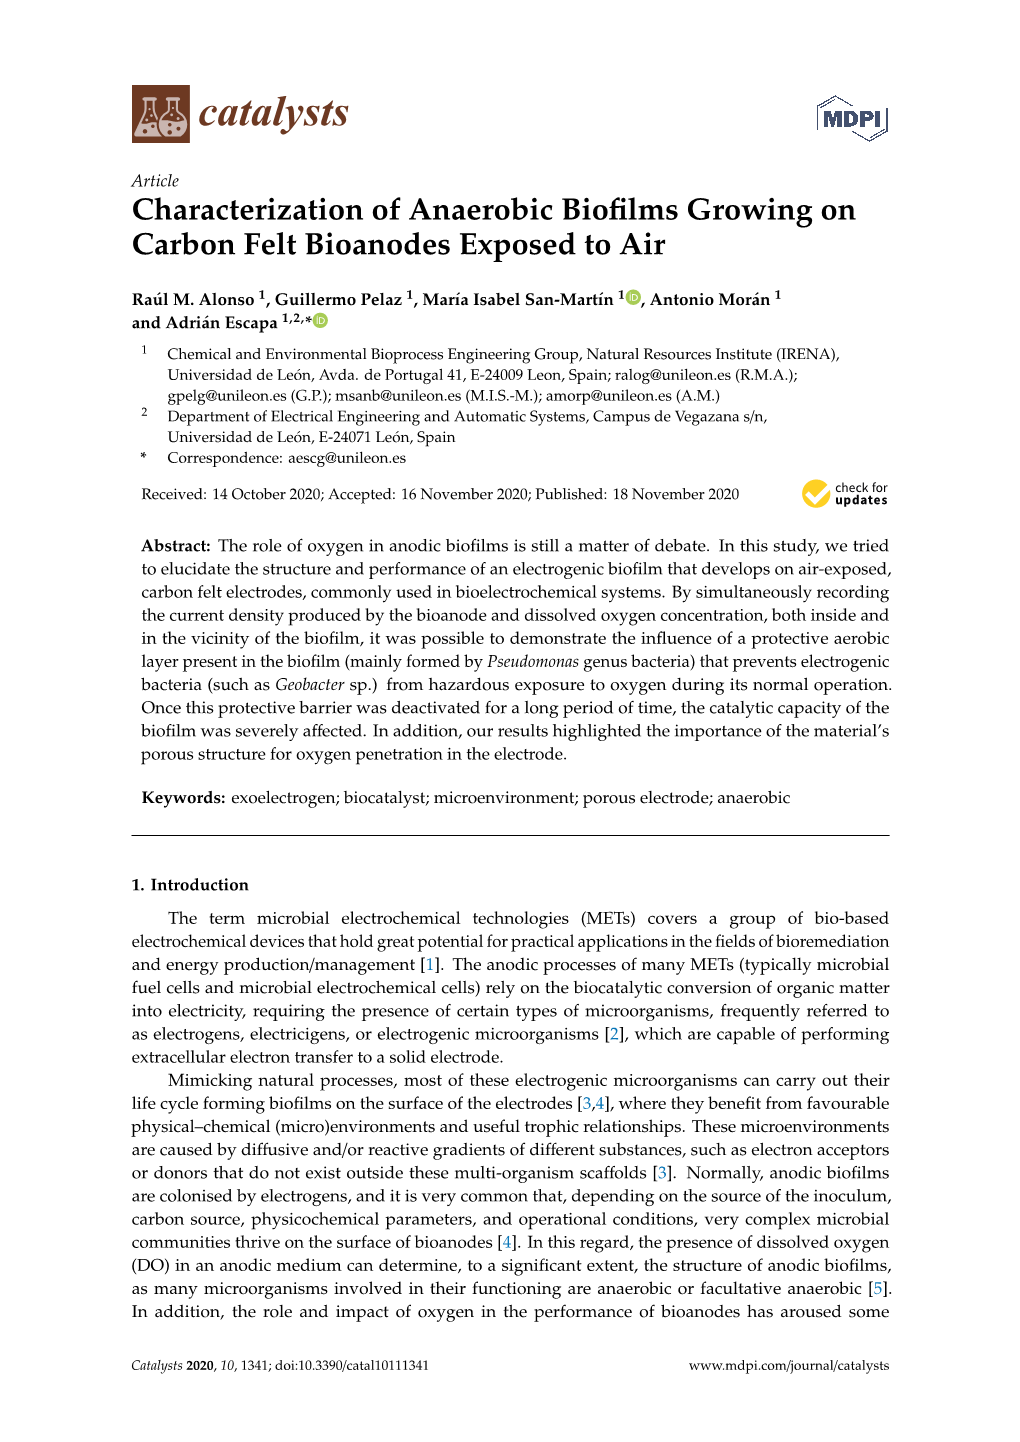 Characterization of Anaerobic Biofilms Growing on Carbon Felt